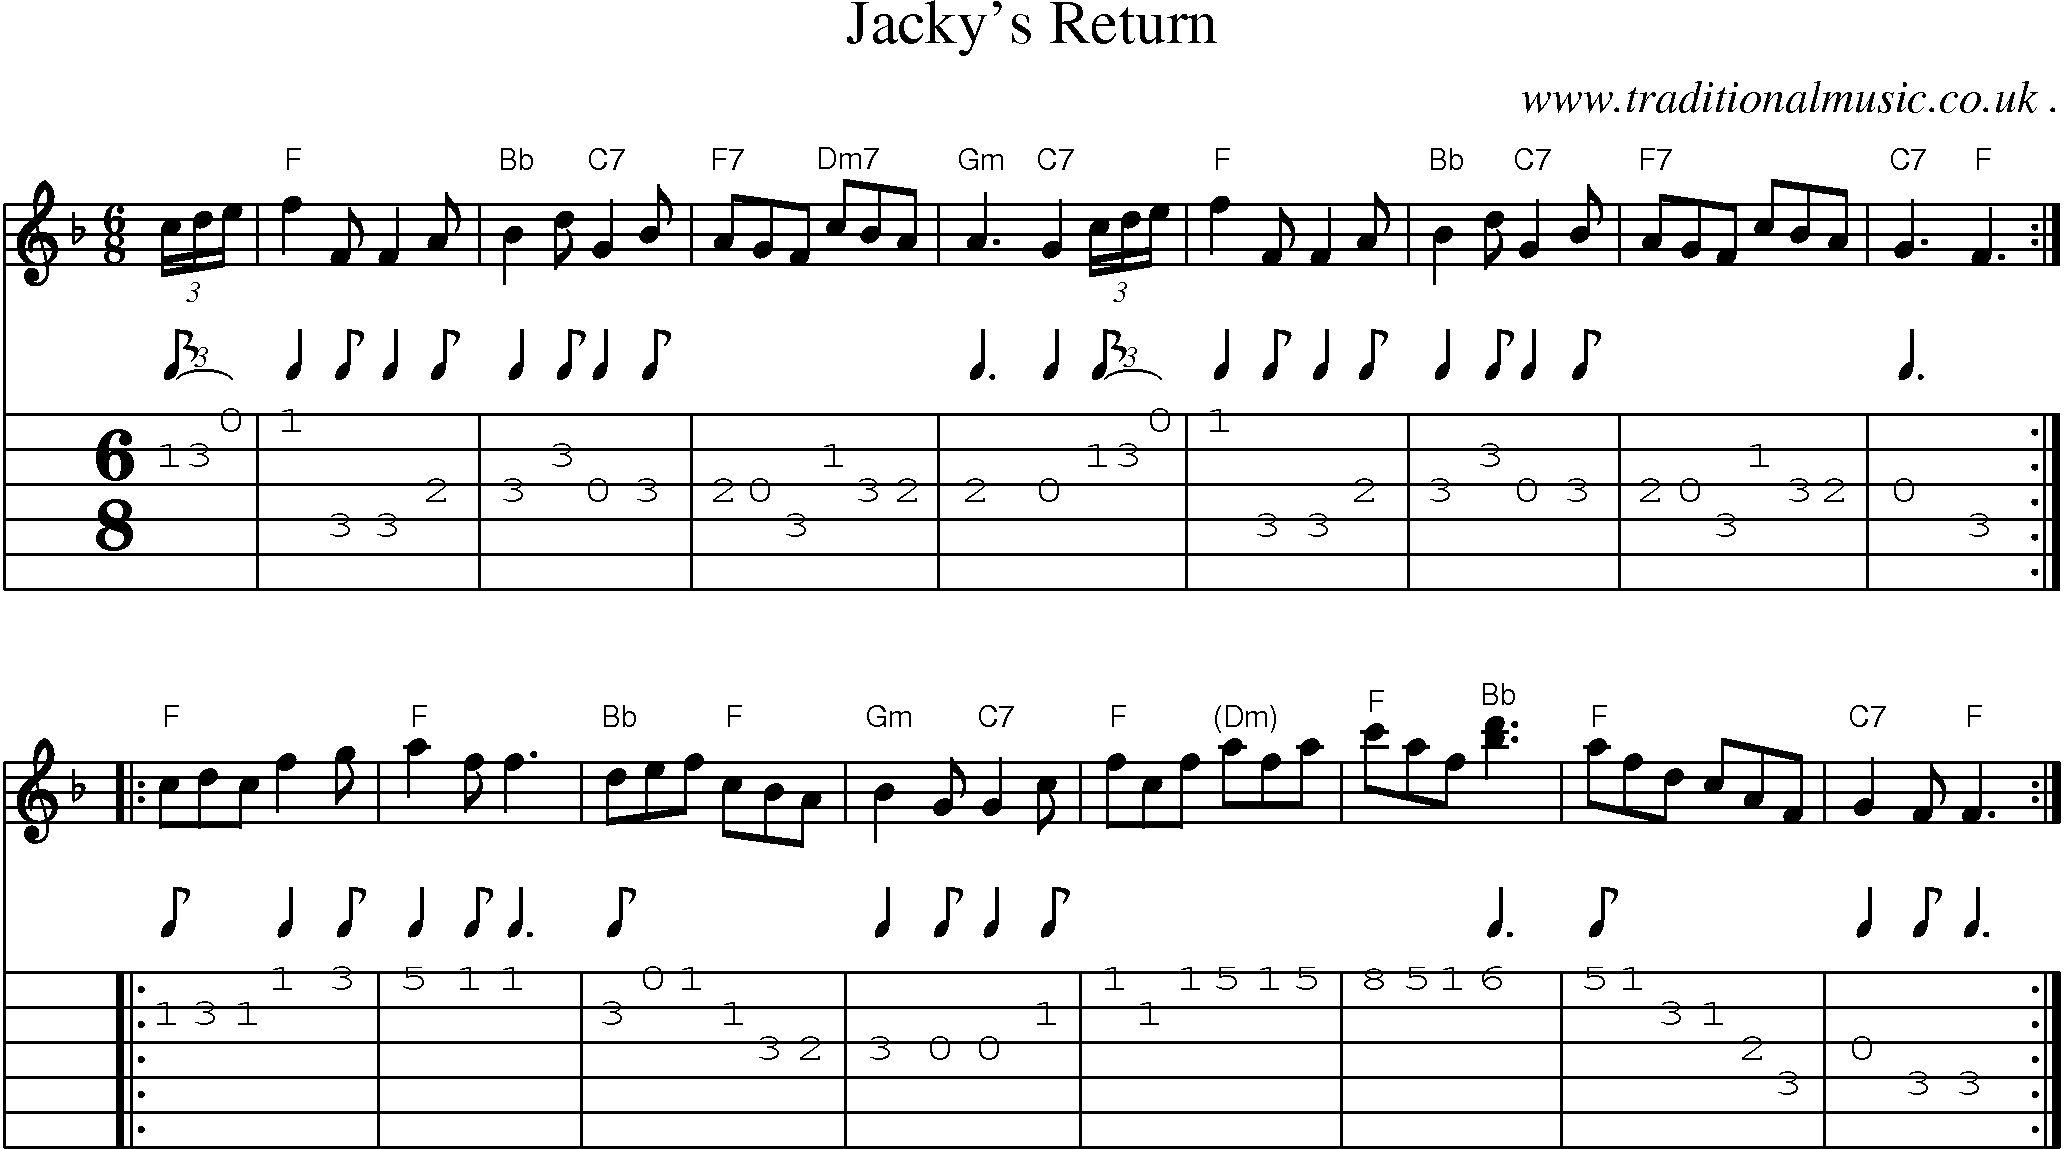 Sheet-music  score, Chords and Guitar Tabs for Jackys Return